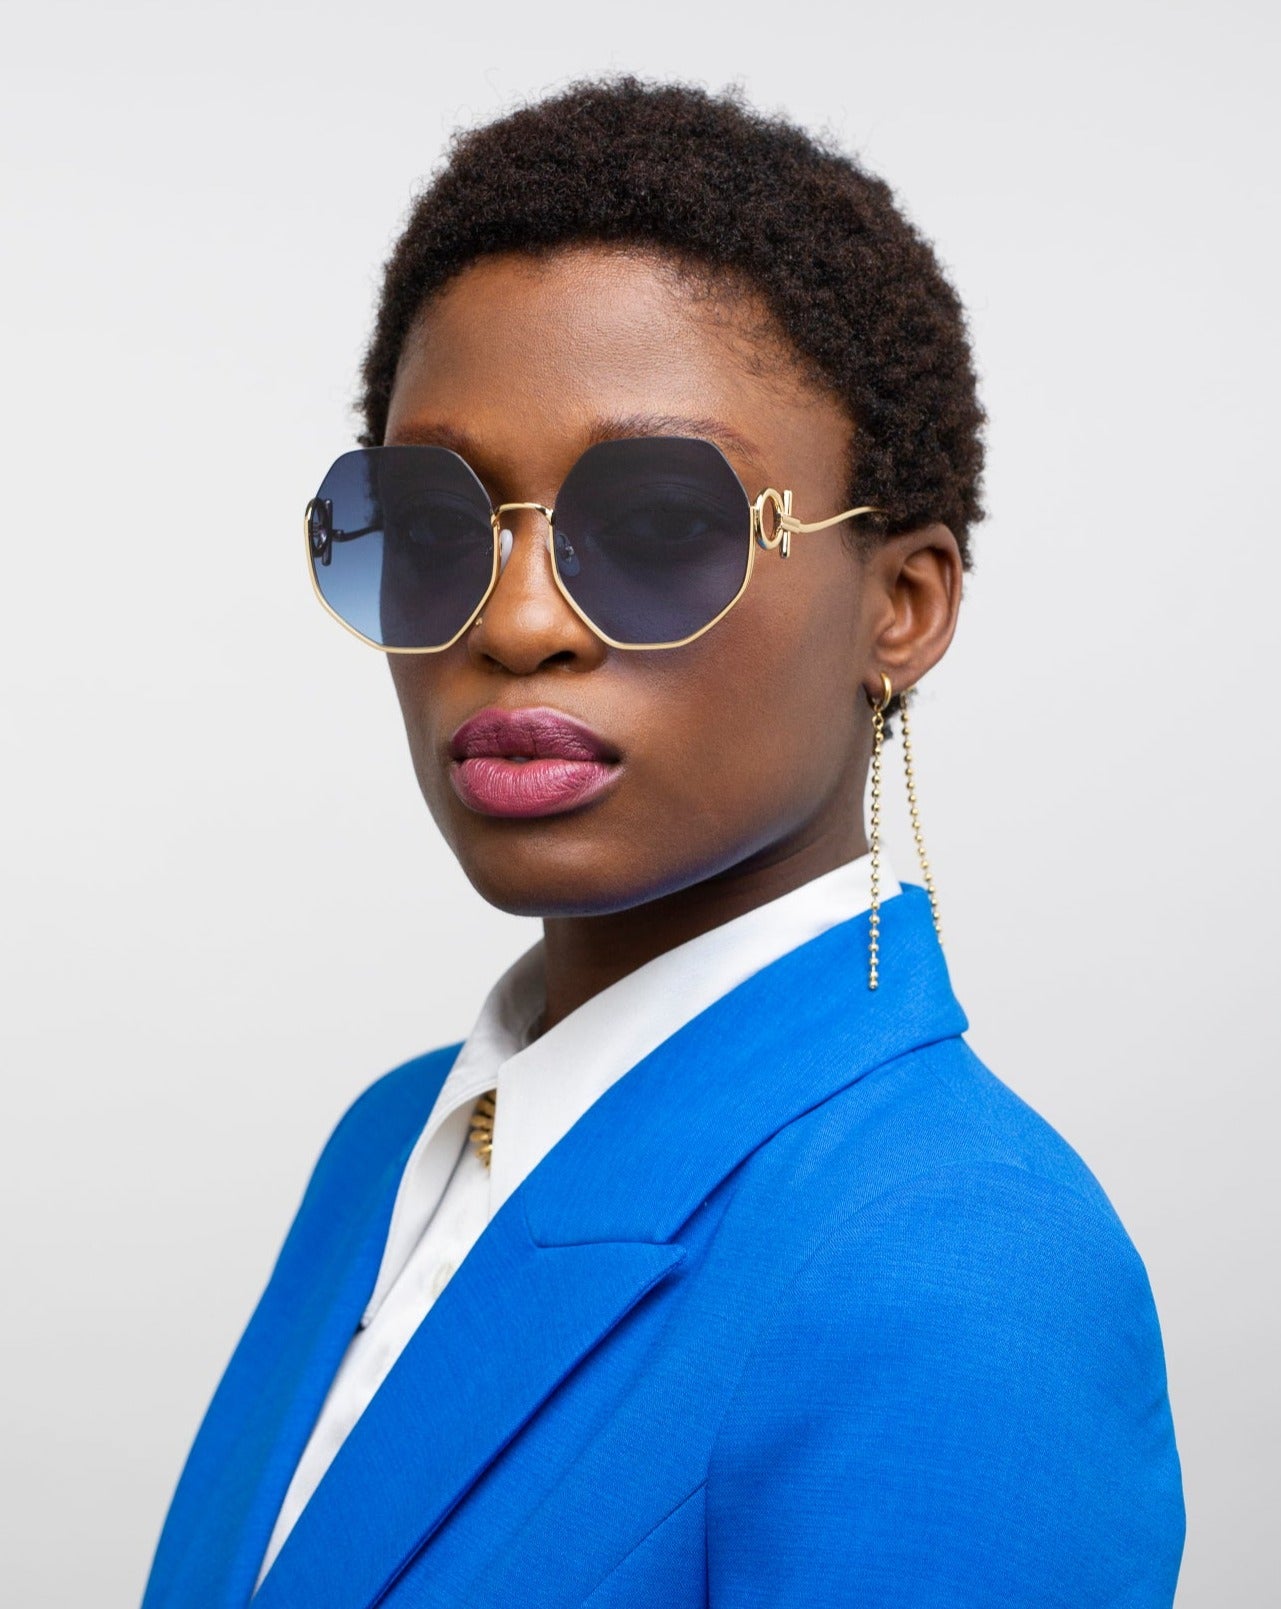 A person wearing octagonal navy blue sunglasses with UVA &amp; UVB protection from For Art&#39;s Sake® called Palace, a blue blazer over a white shirt, and an earring with multiple 18-karat gold-plated chains running down from it. The person has short curly black hair and is standing against a plain light grey background.